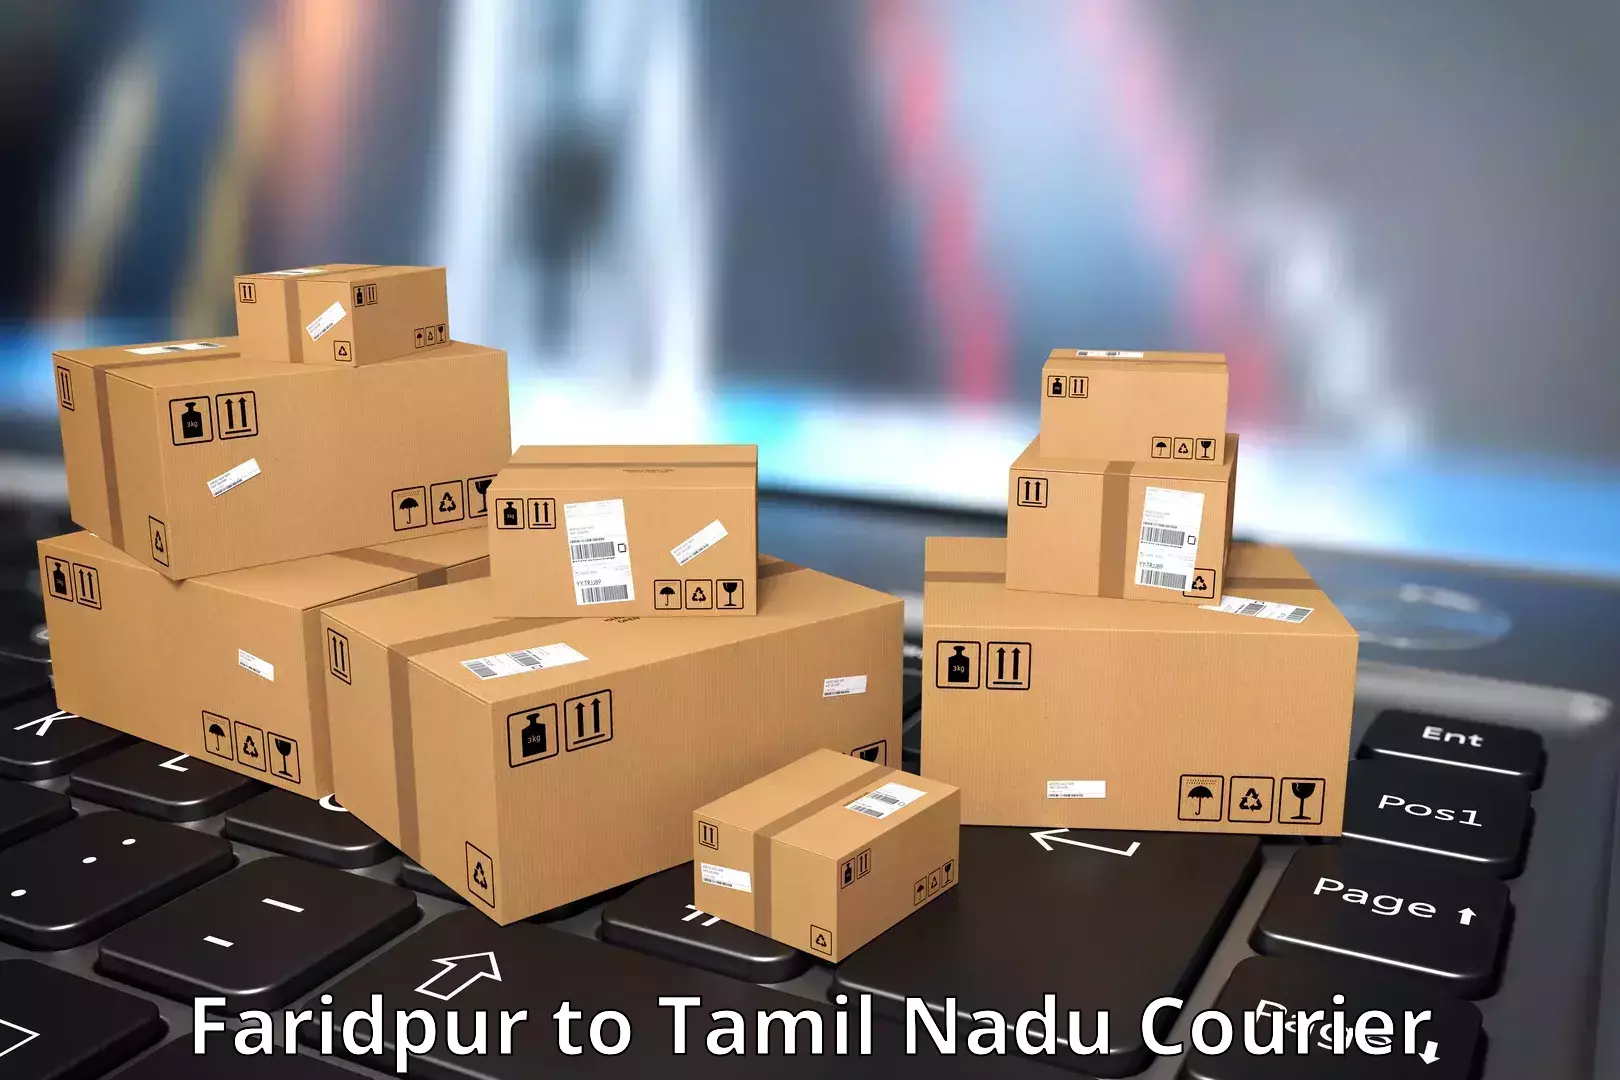 High-priority parcel service Faridpur to Rajapalayam